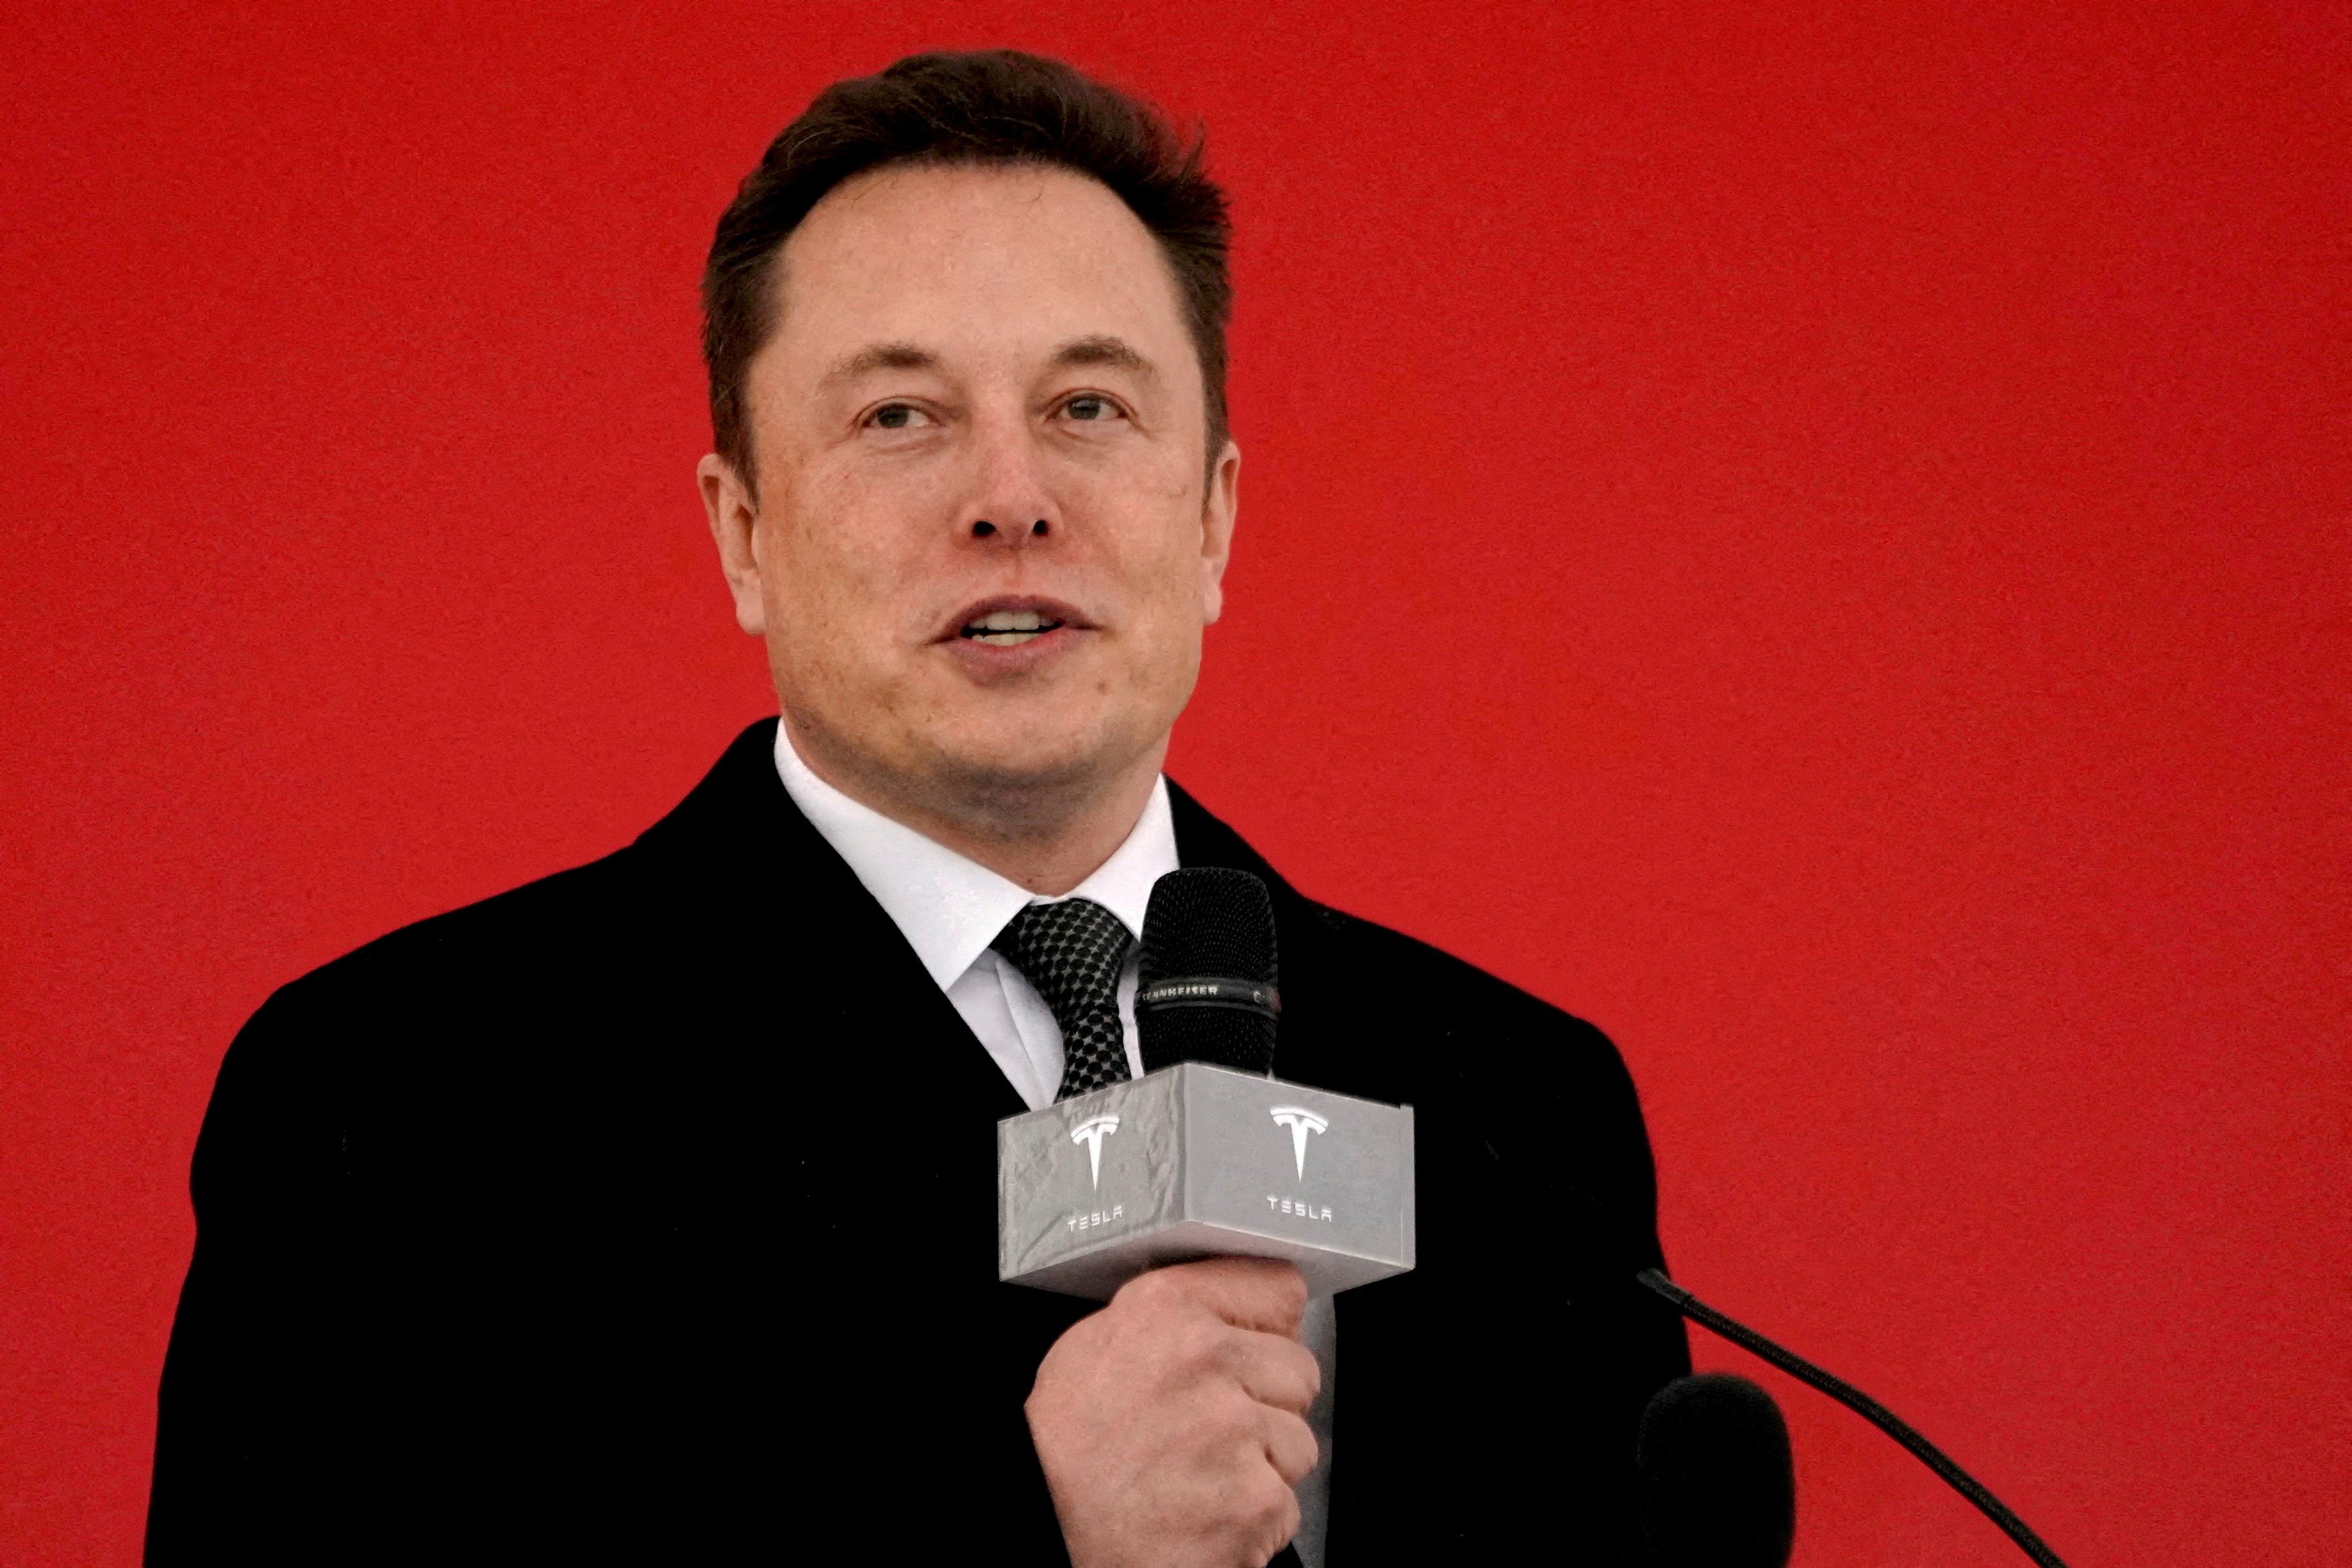 Tesla CEO Elon Musk attends the ground-breaking ceremony for the Tesla Gigafactory in Shanghai, China January 7, 2019. REUTERS/Aly Song/File